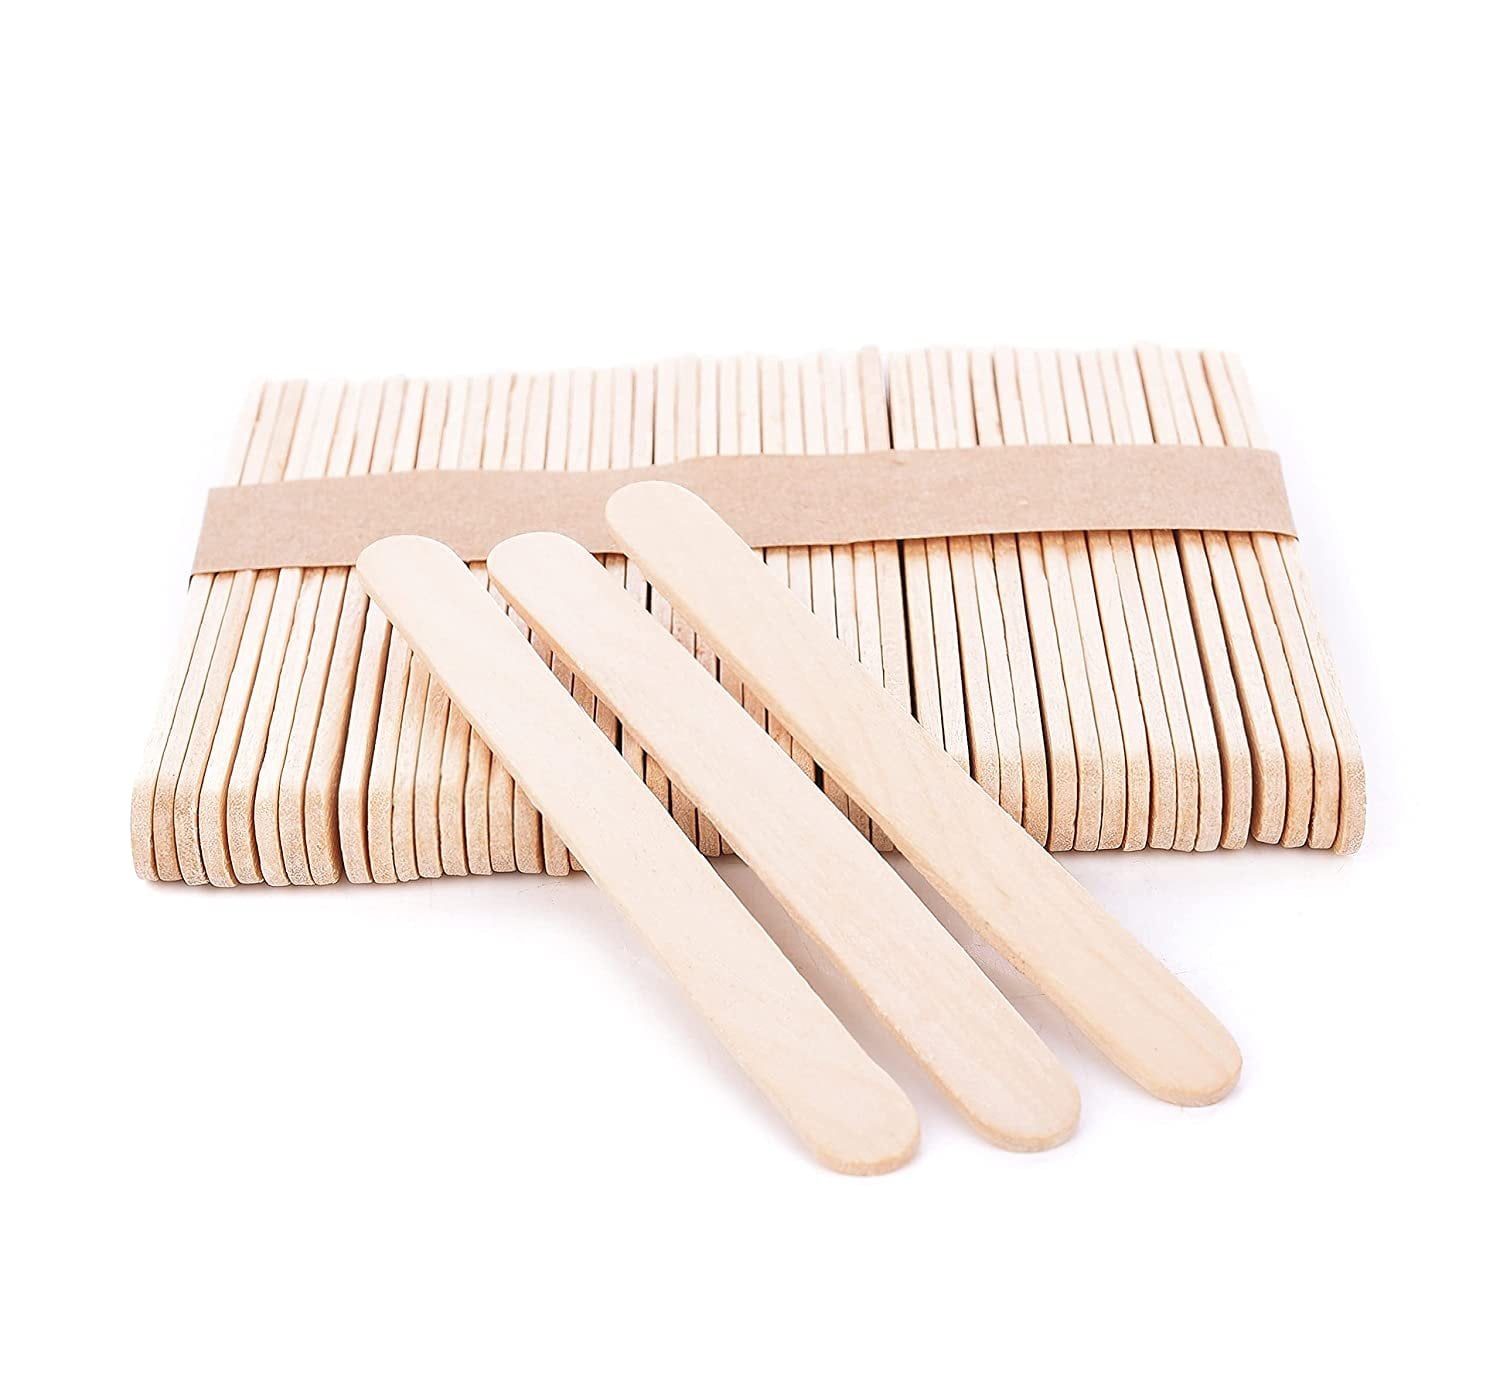 JMU Tongue Depressors 100pcs, 6 Tongue Blades Wooden Non-Sterile for  Crafts Medical Tattoo Popsicle